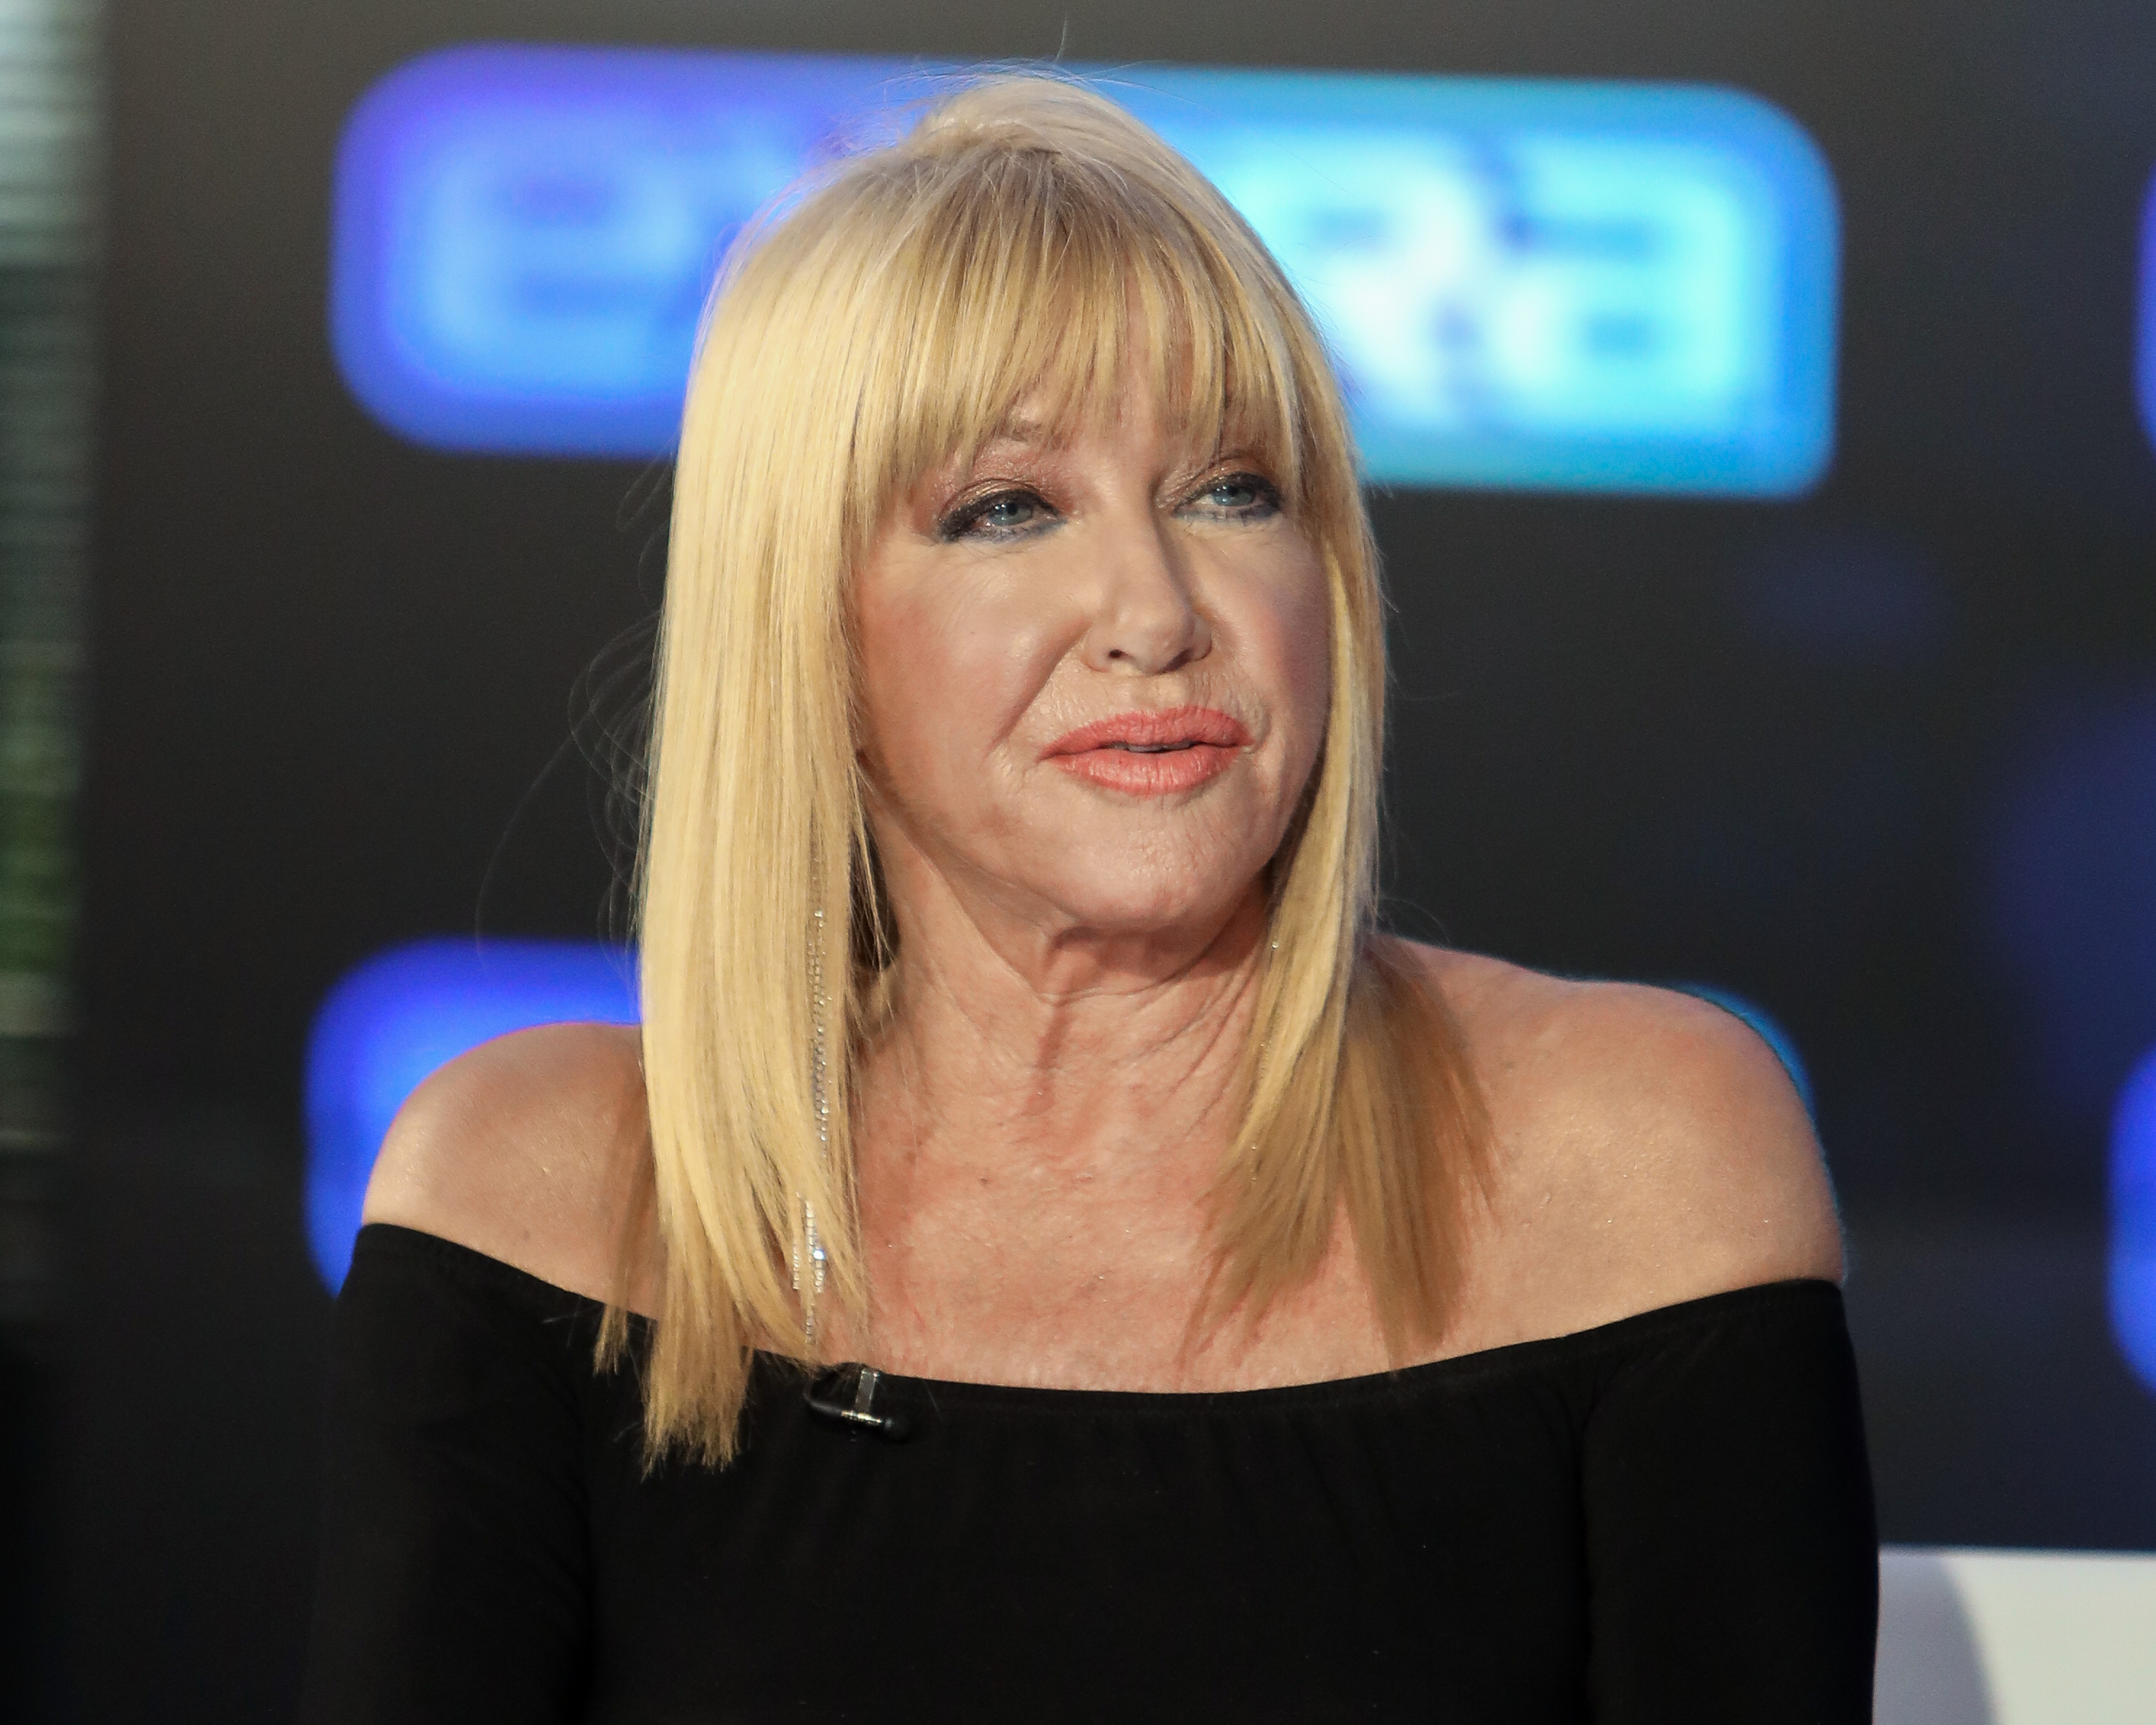 Suzanne Somers on "Extra" at Burbank Studios on February 19, 2020 | Source: Getty Images